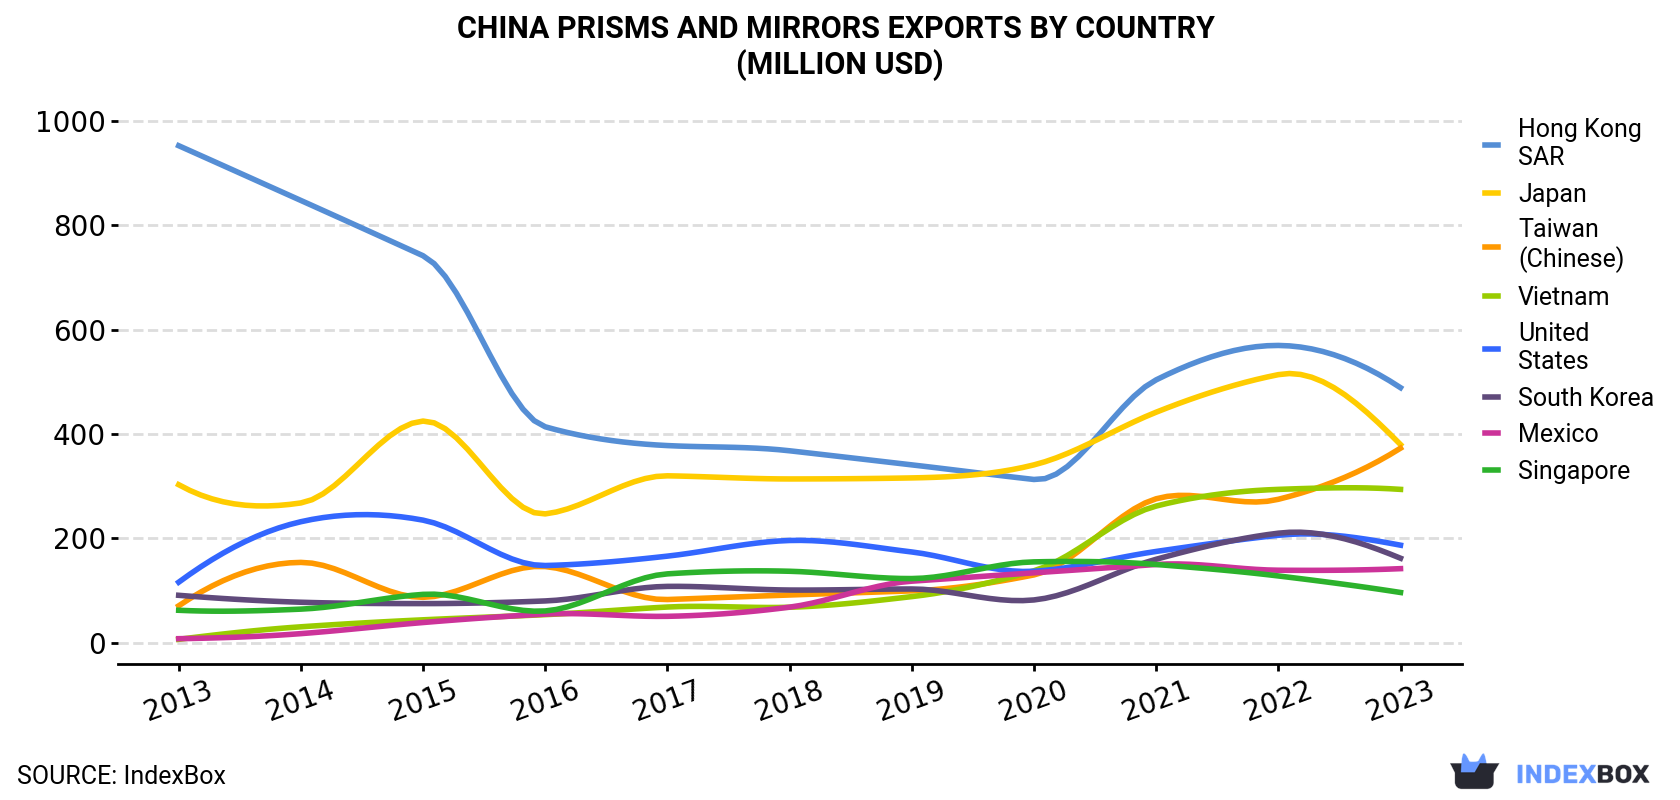 China Prisms And Mirrors Exports By Country (Million USD)